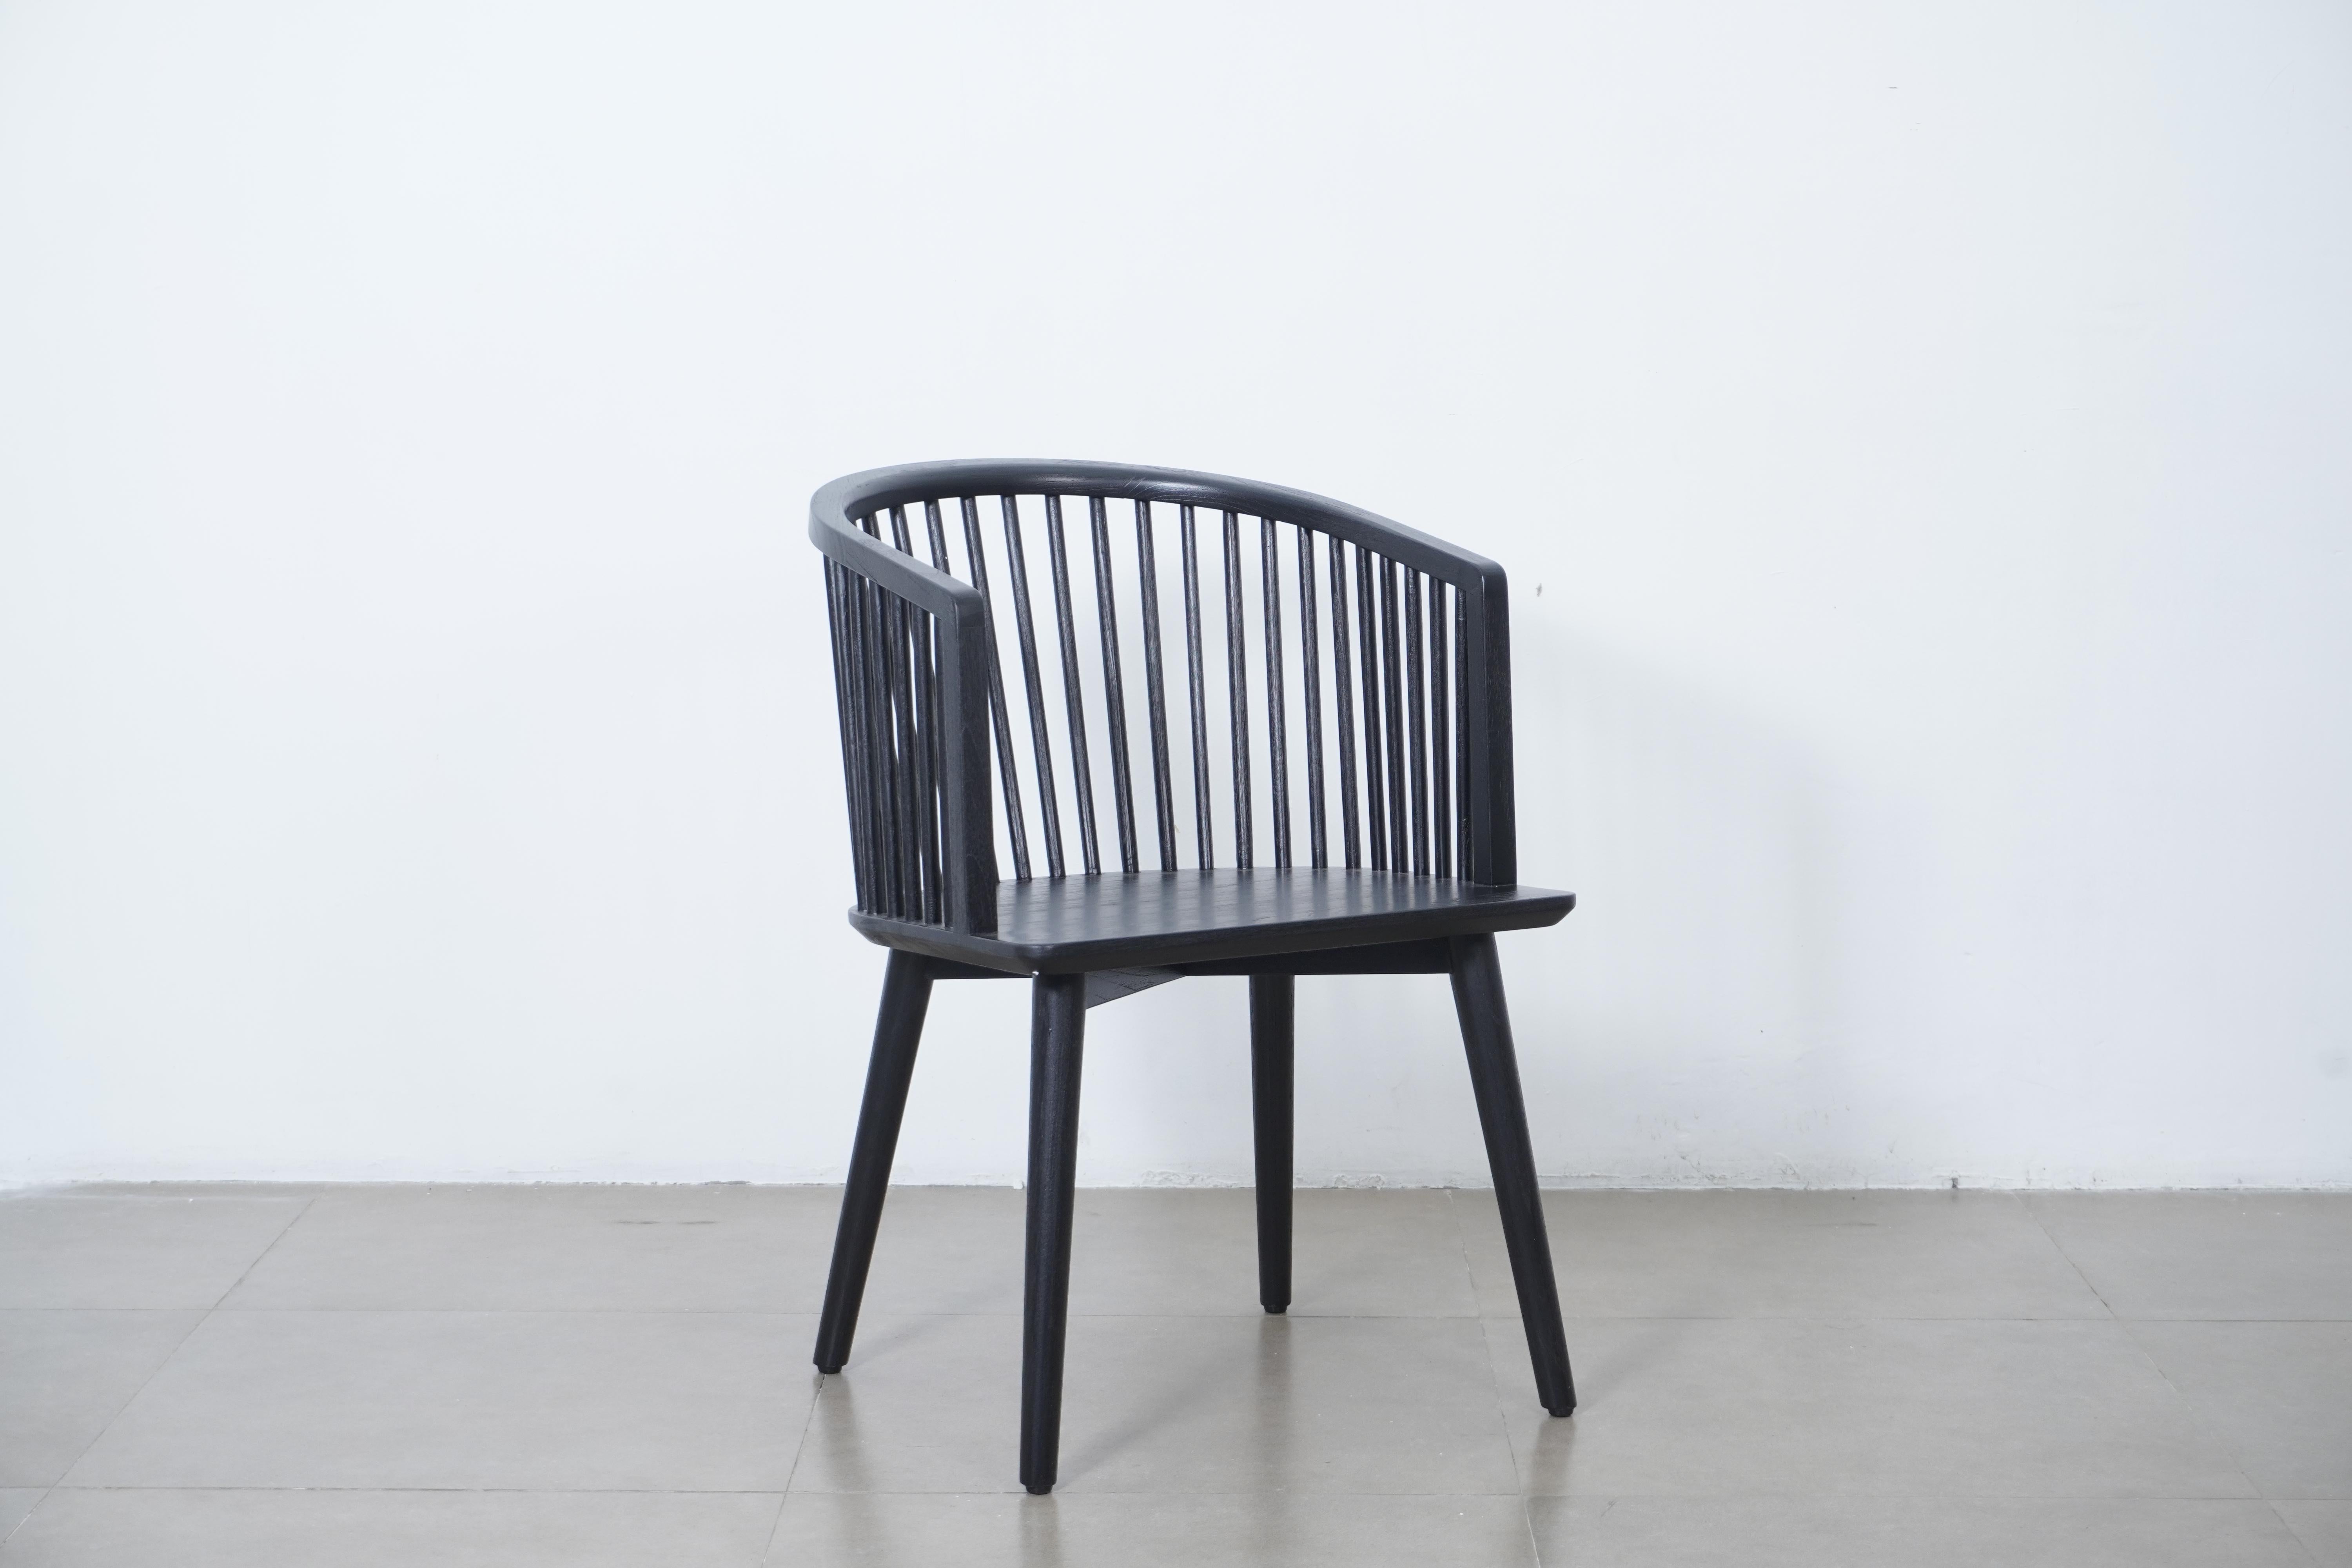 Modern Danish Peasant Dining Chair, Teak in Black Finish. Set of 6 chairs For Sale 1